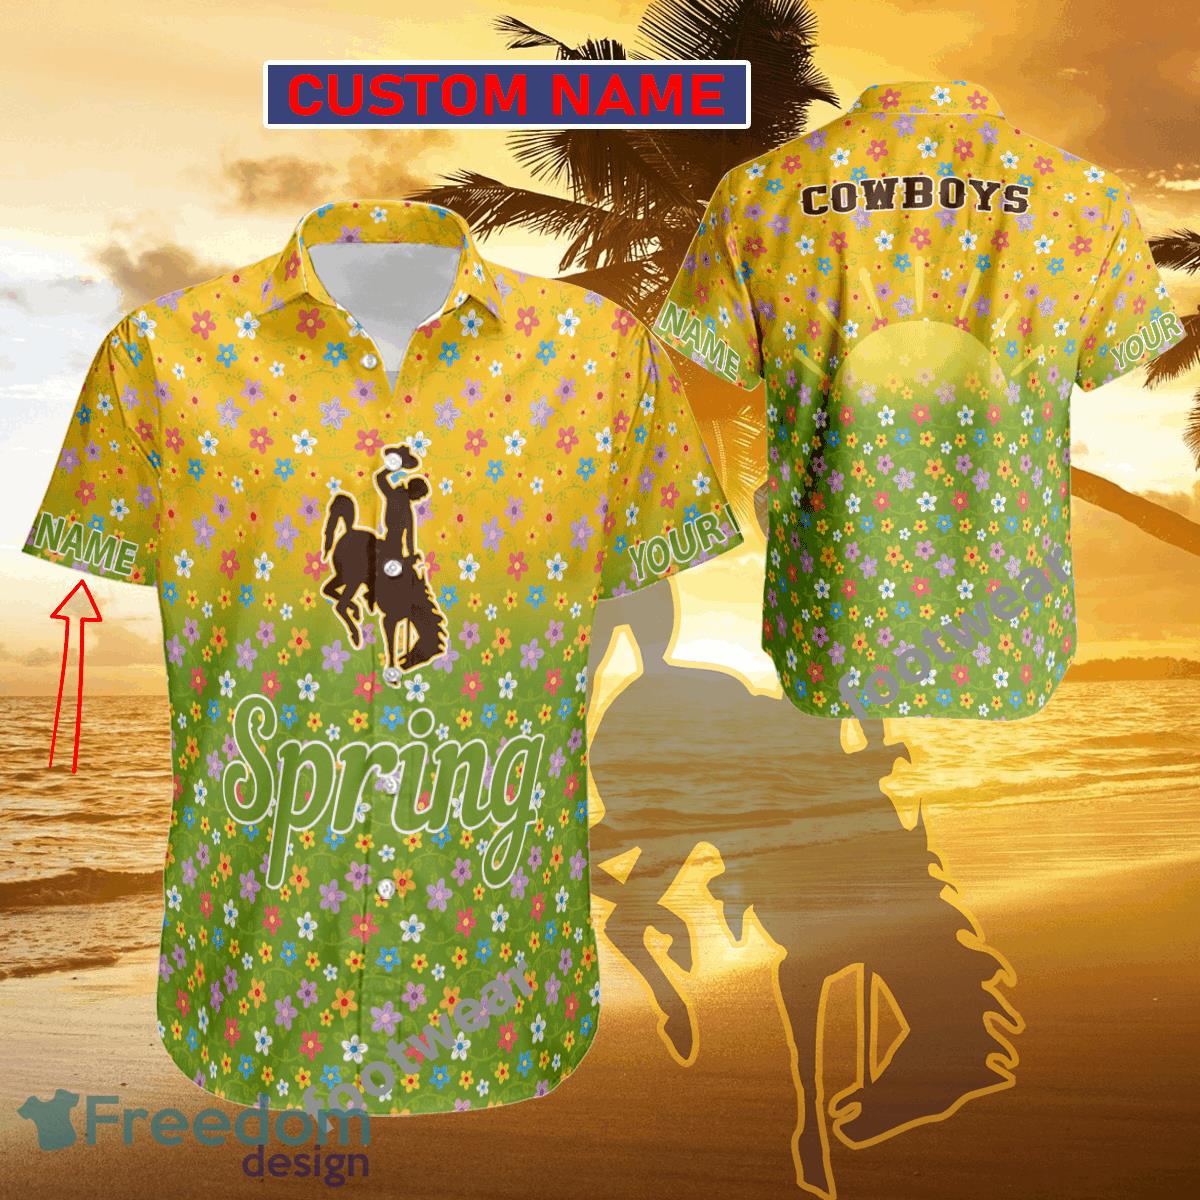 Wyoming Cowboys 3D Hawaiian Shirt New Custom Name Tropical Beach Gift For Fans - Wyoming Cowboys 3D Hawaiian Shirt New Custom Name Tropical Beach Gift For Fans